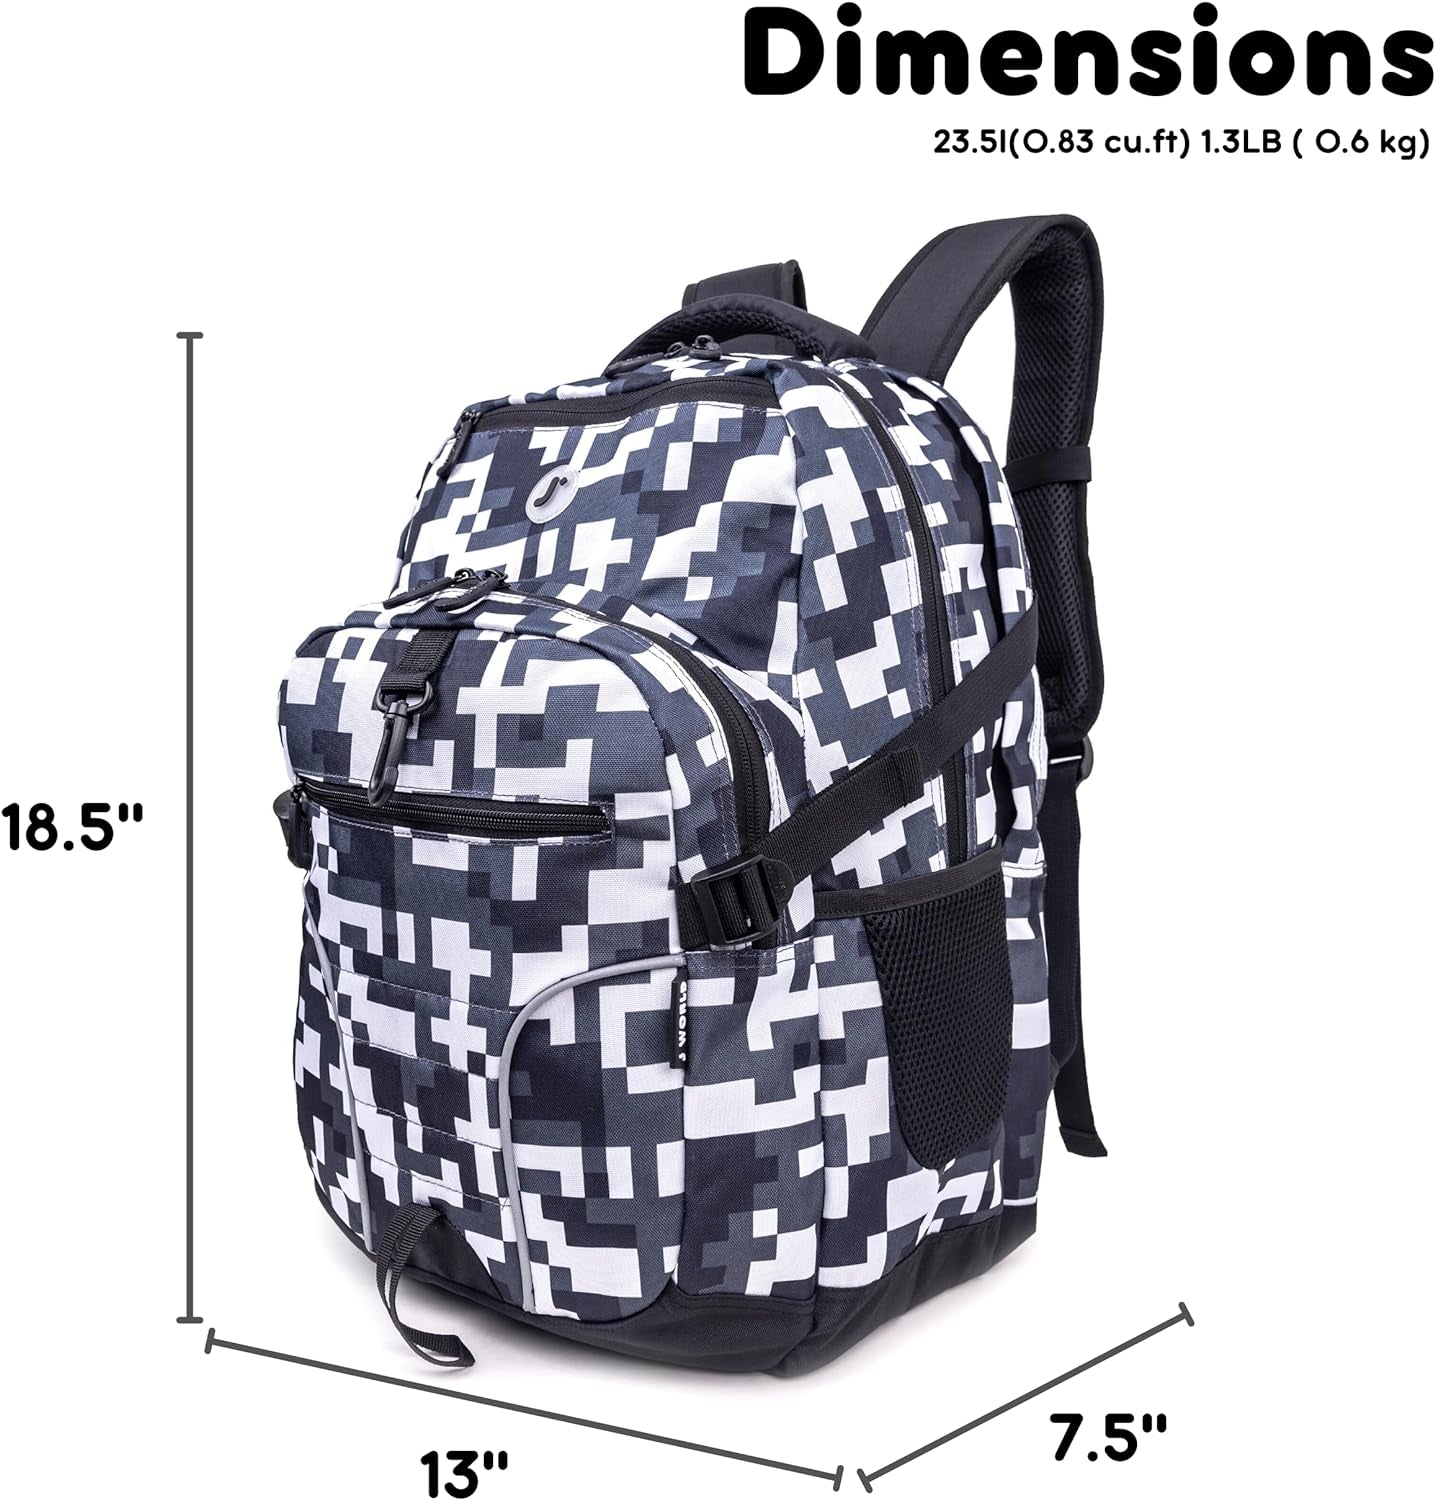 Atom Multi-Compartment Laptop Backpack, Camo, 18.5 X 13 X 7.5 (H X W X D)